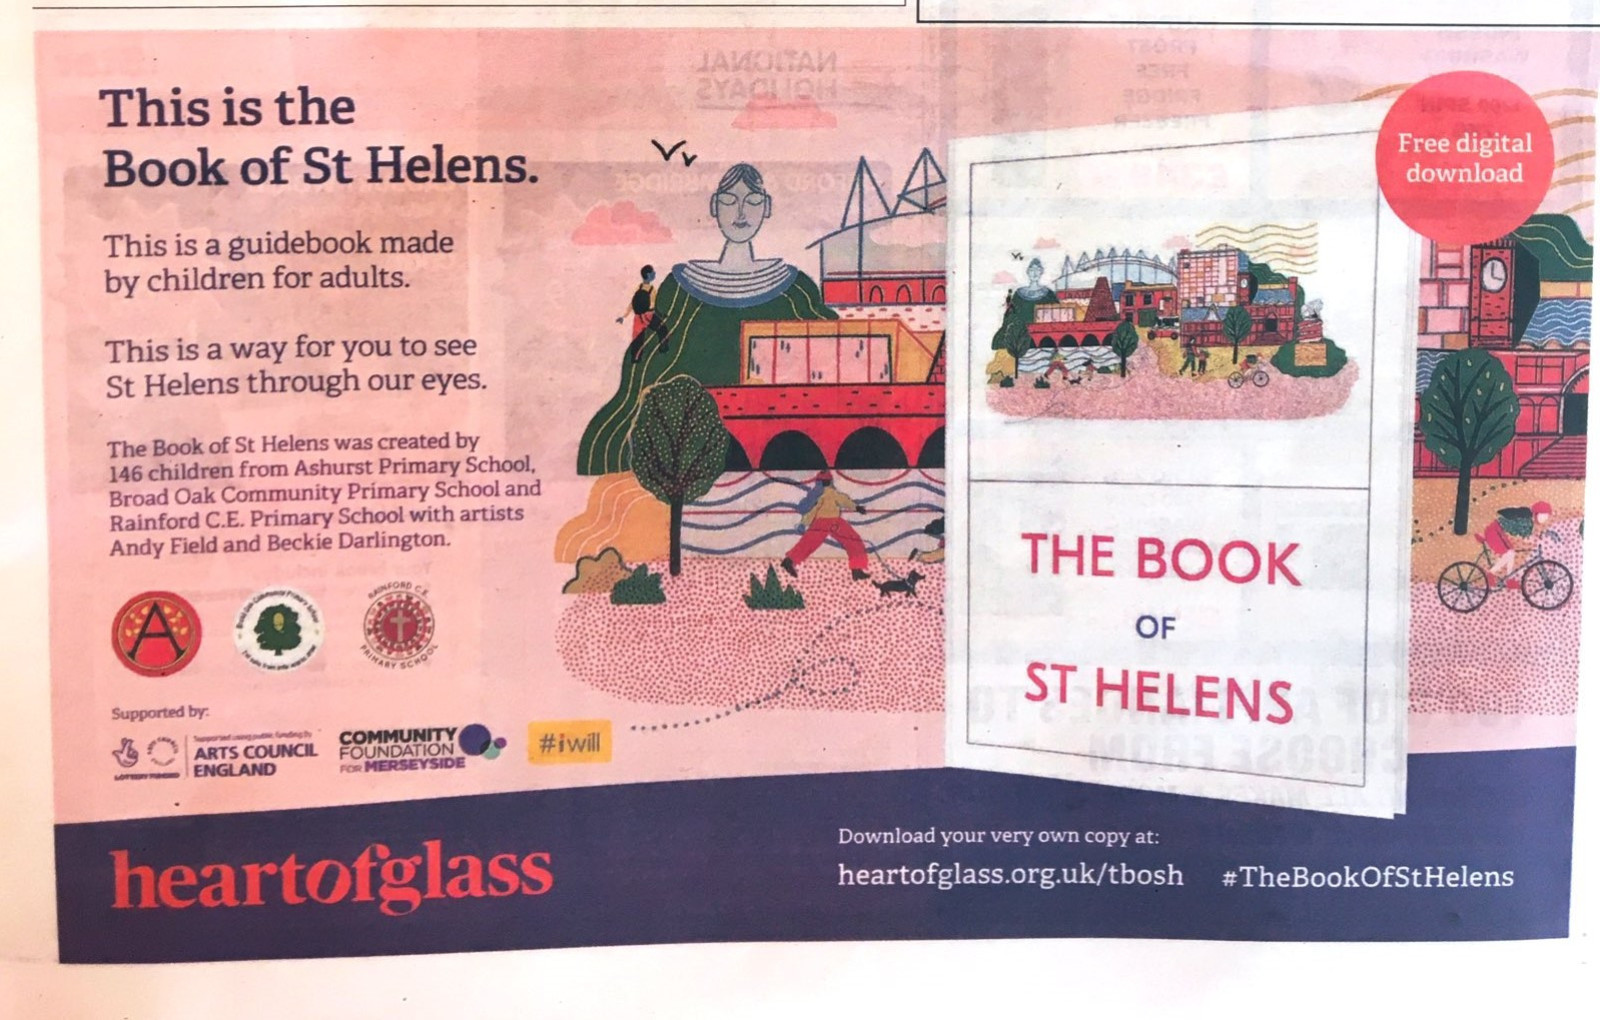 A picture of an advertisement for the free download of the book of St Helens.